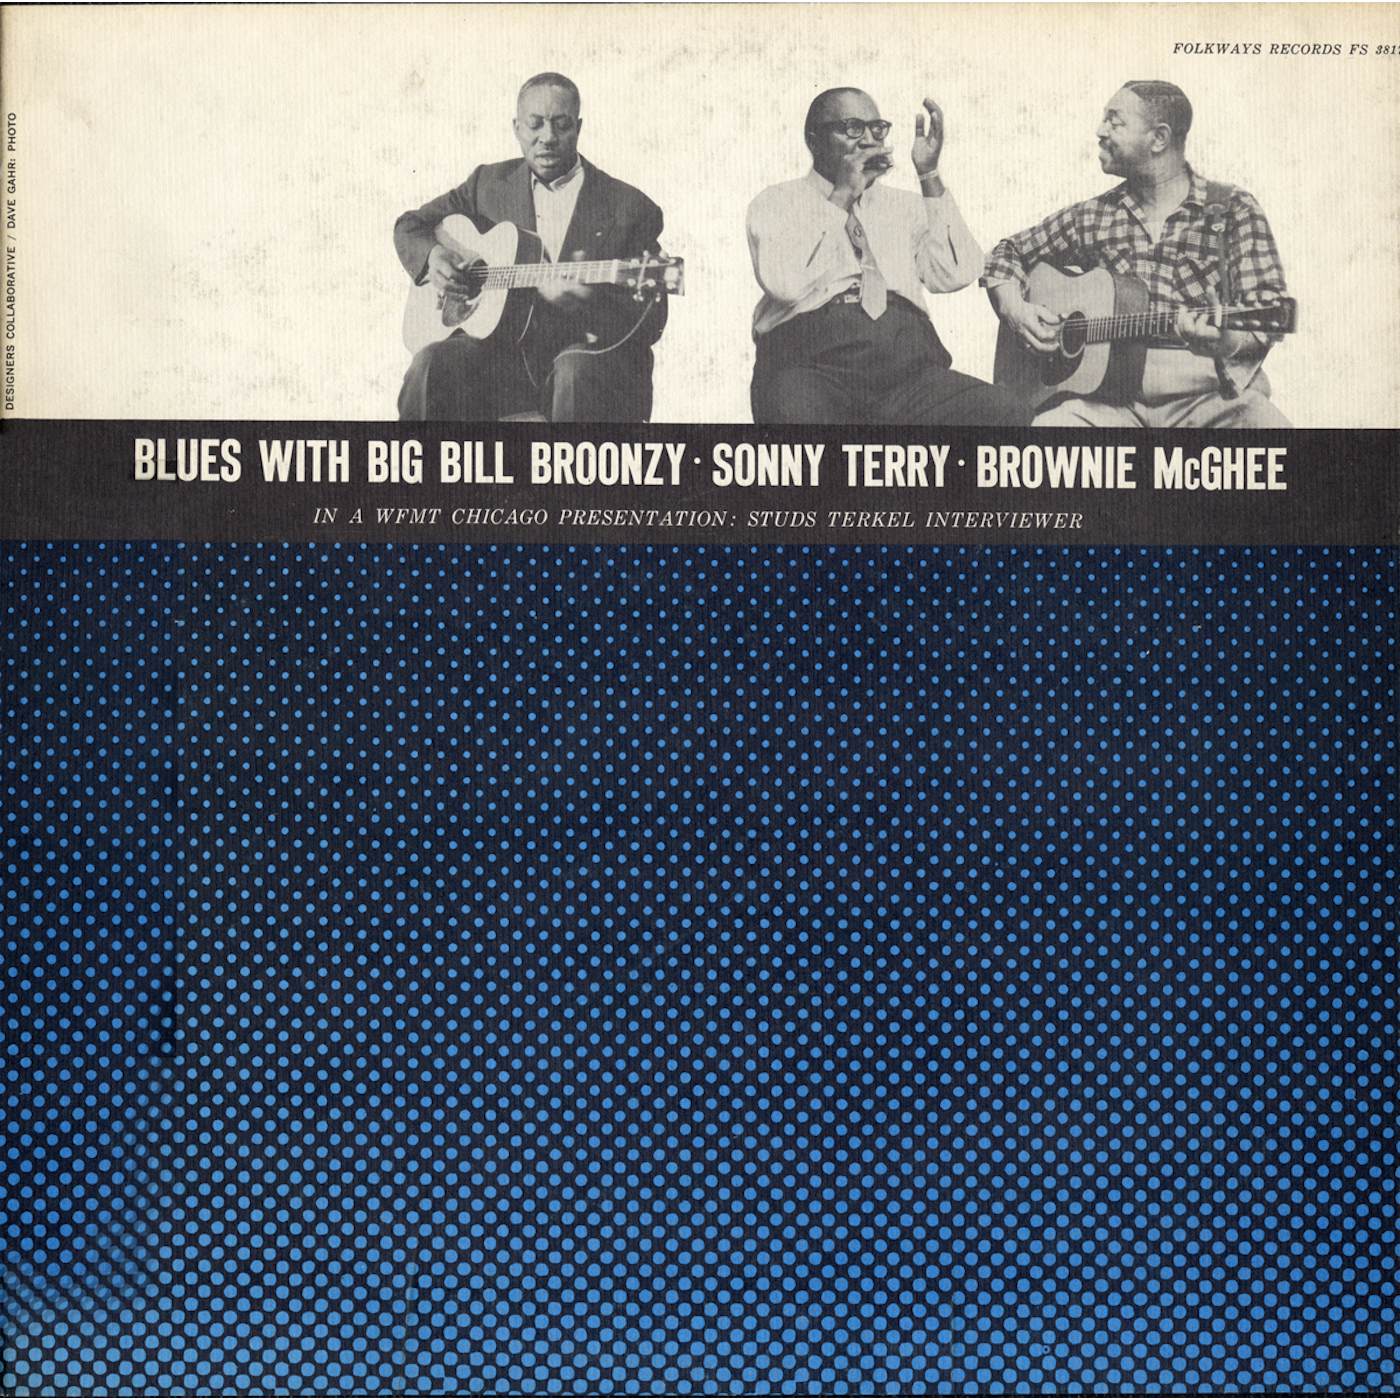 BLUES WITH BIG BILL BROONZY SONNY TERRY CD